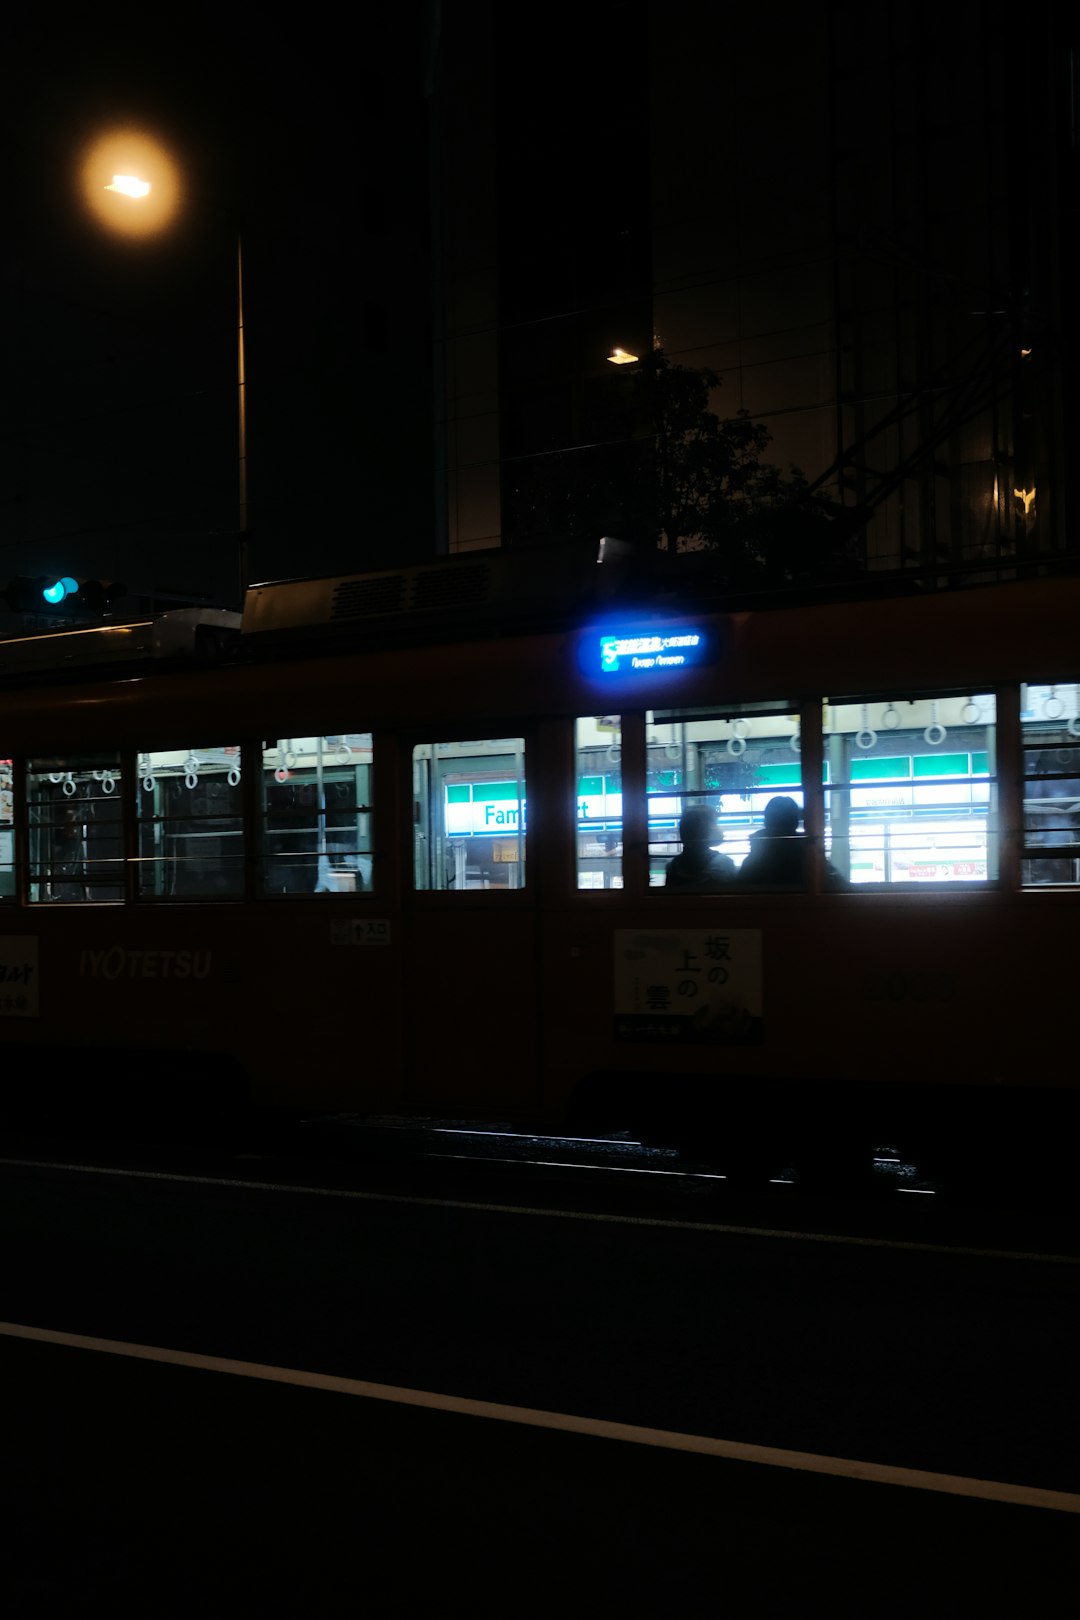 white and brown train during night time